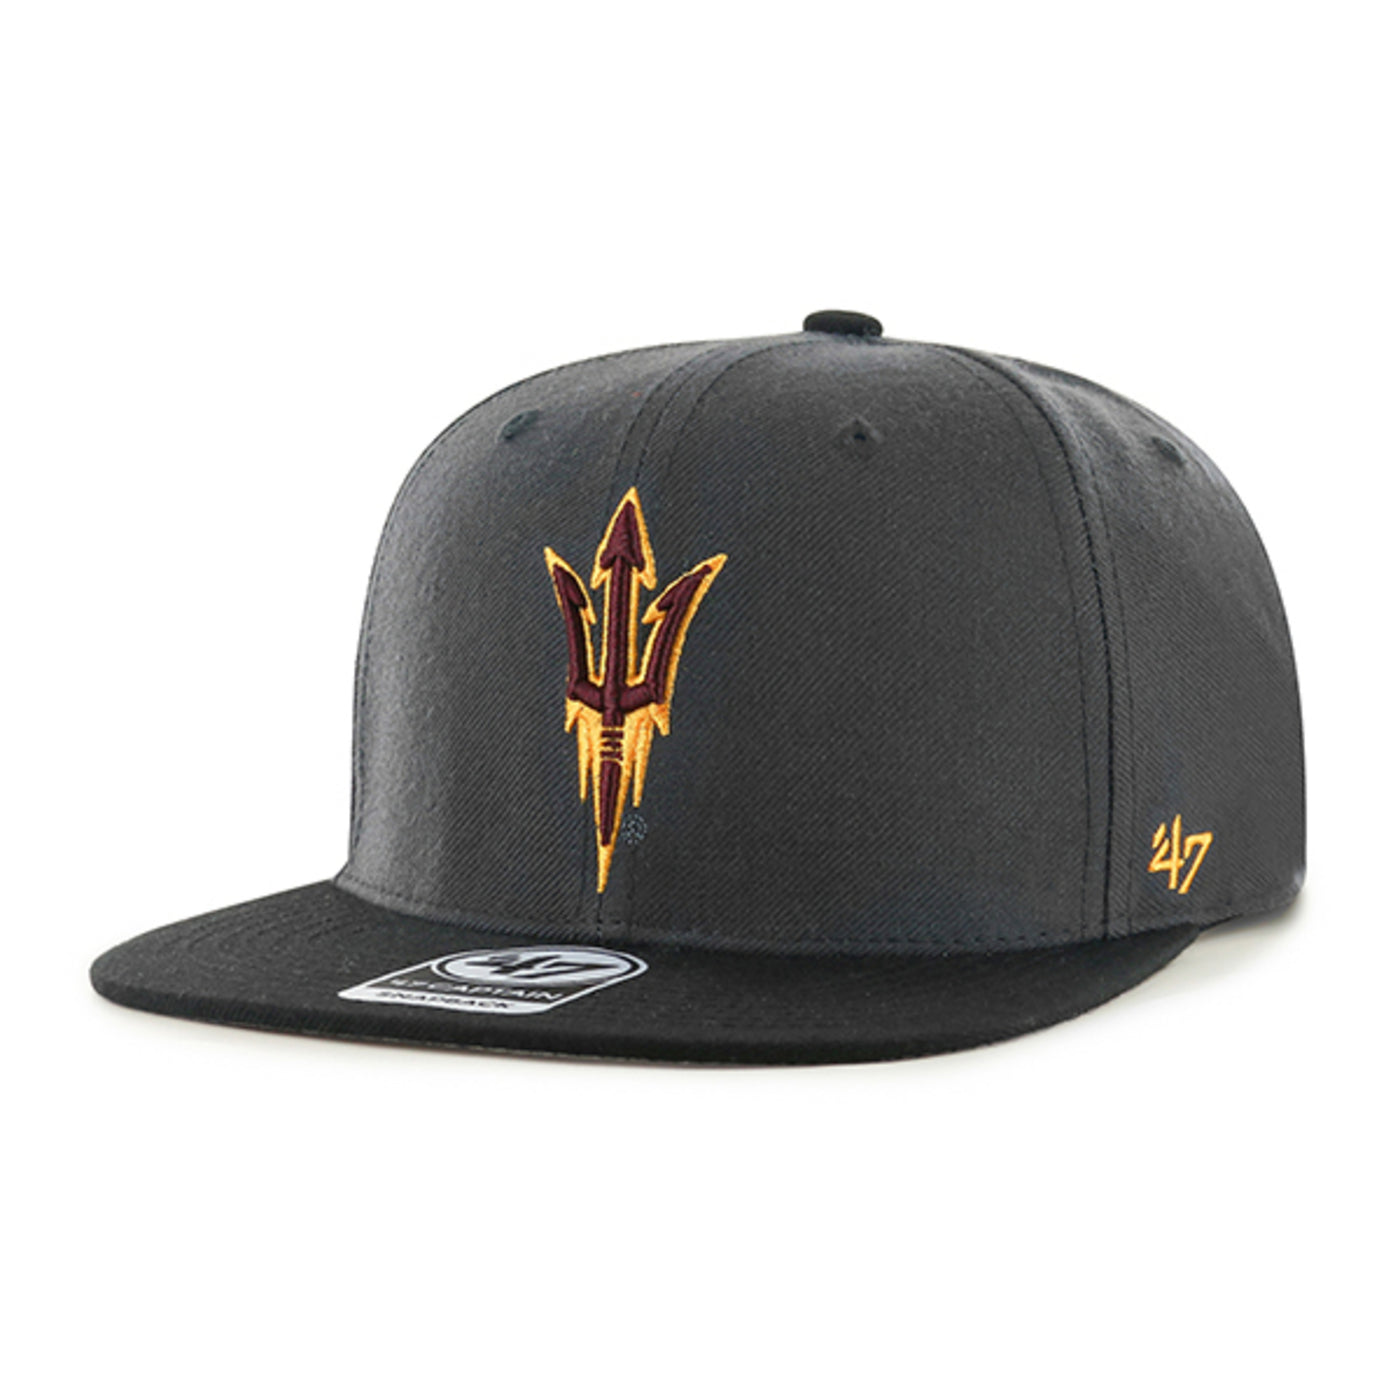 ASU gray and charcoal snapback hat with a maroon pitchfork with a gold outline from 47brand